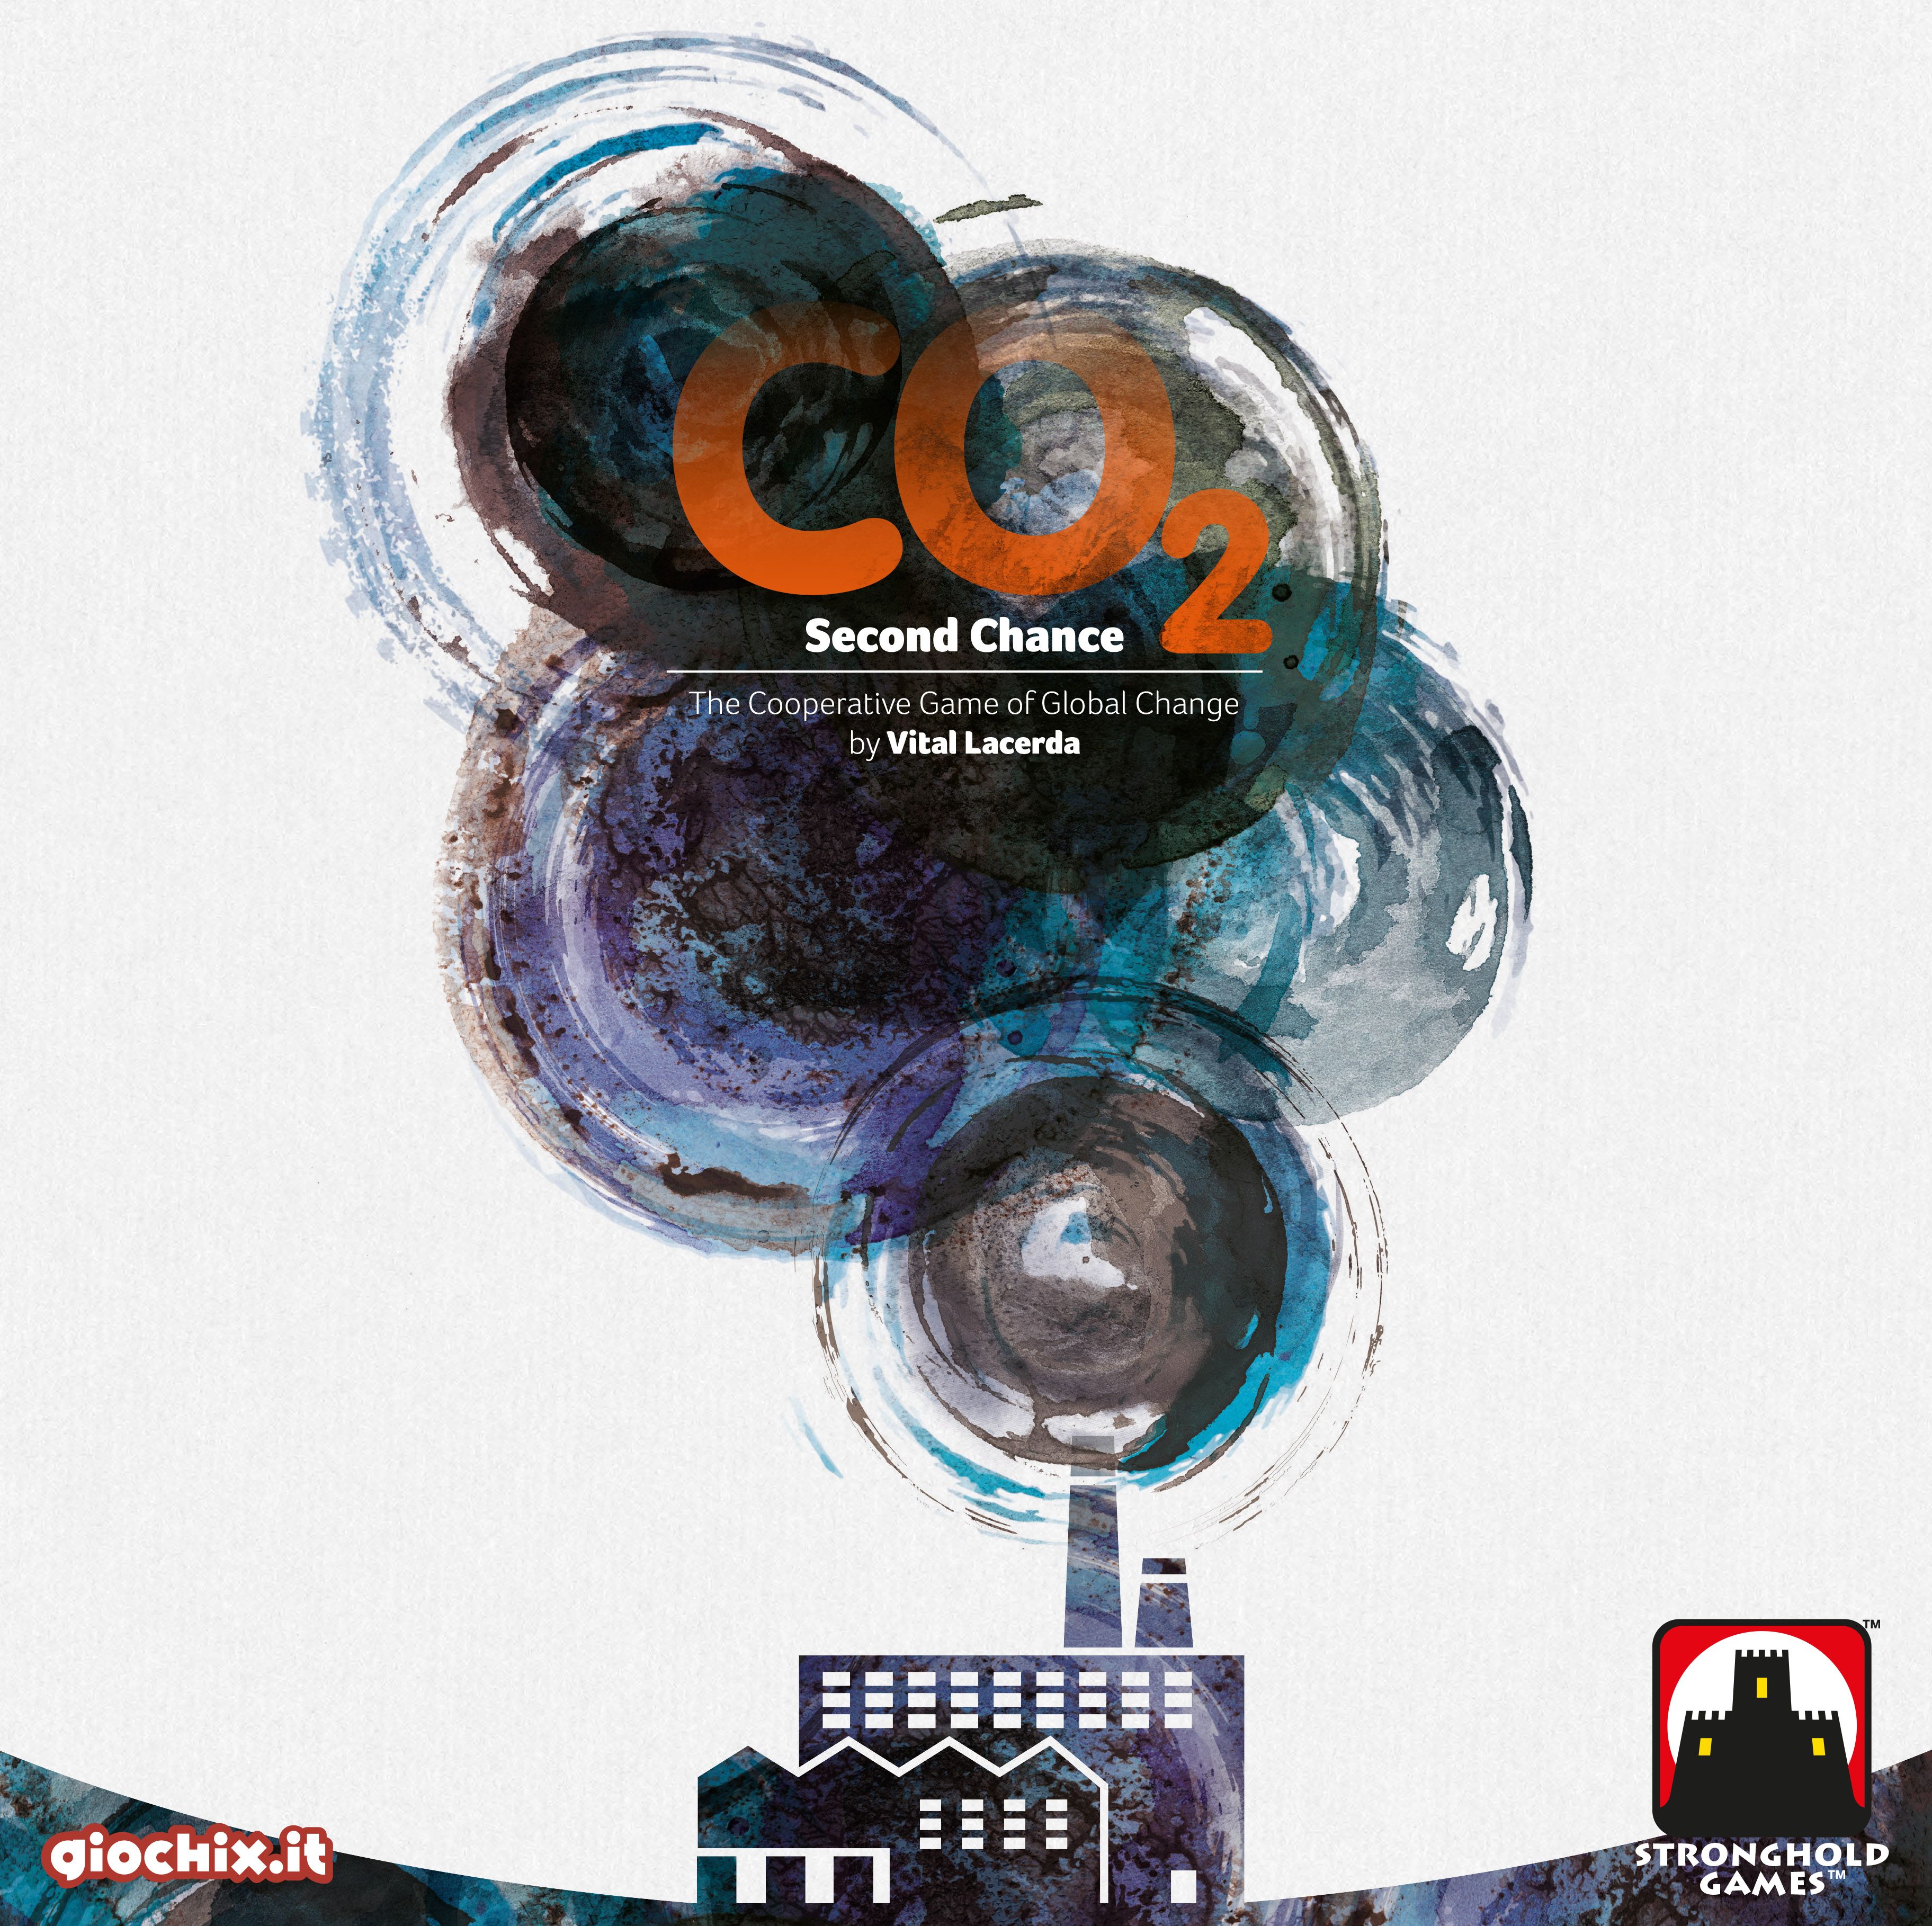 CO2: Second Chance front face